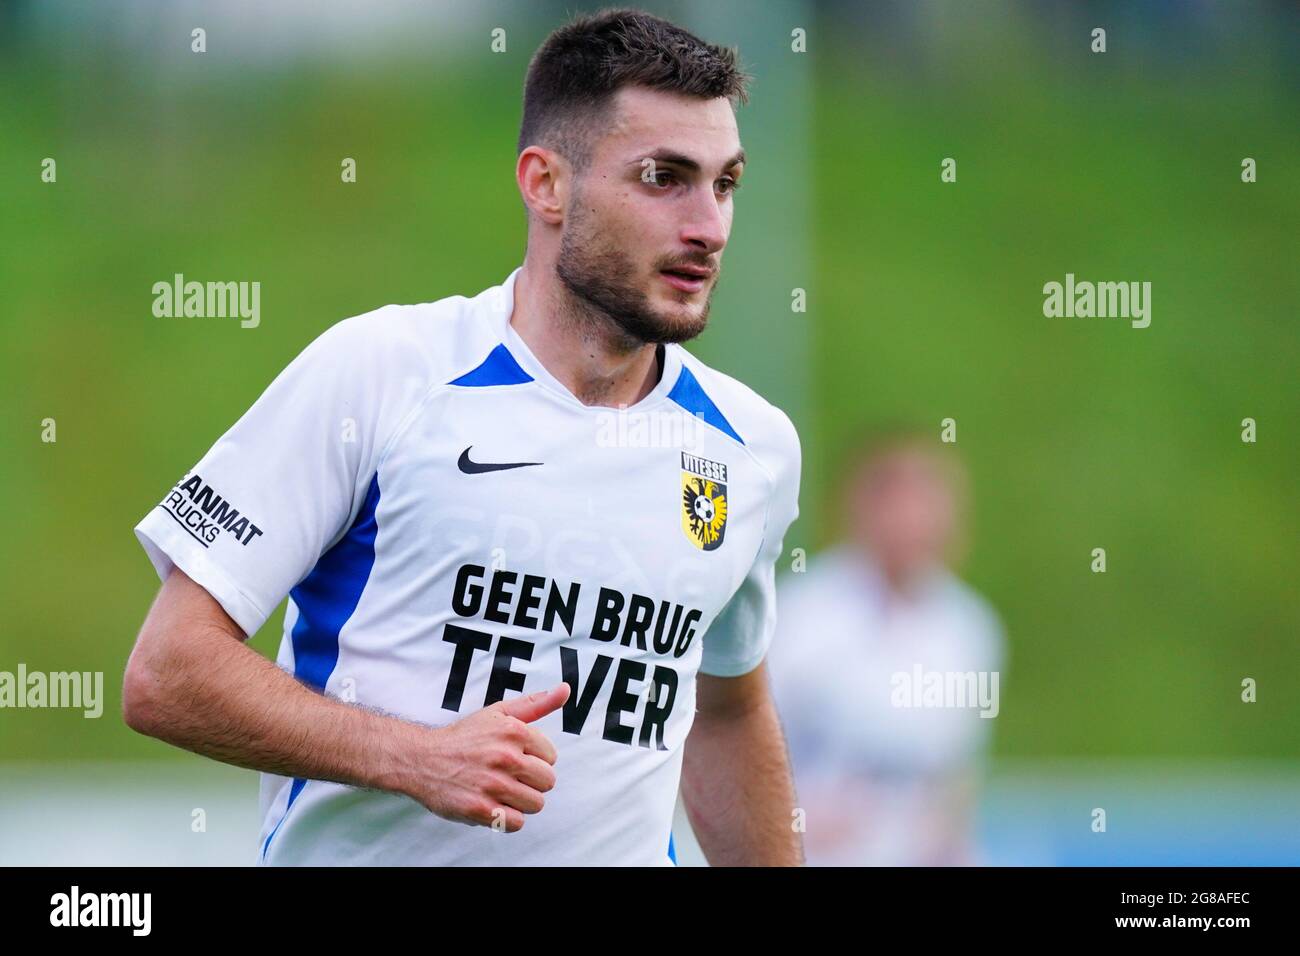 GELSENKIRCHEN, GERMANY - JULY 16: Matus Bero of Vitesse during the Club Friendly match between FC Schalke 04 and Vitesse at Parkstadion on July 16, 2021 in Gelsenkirchen, Germany (Photo by Joris Verwijst/Orange Pictures) Stock Photo